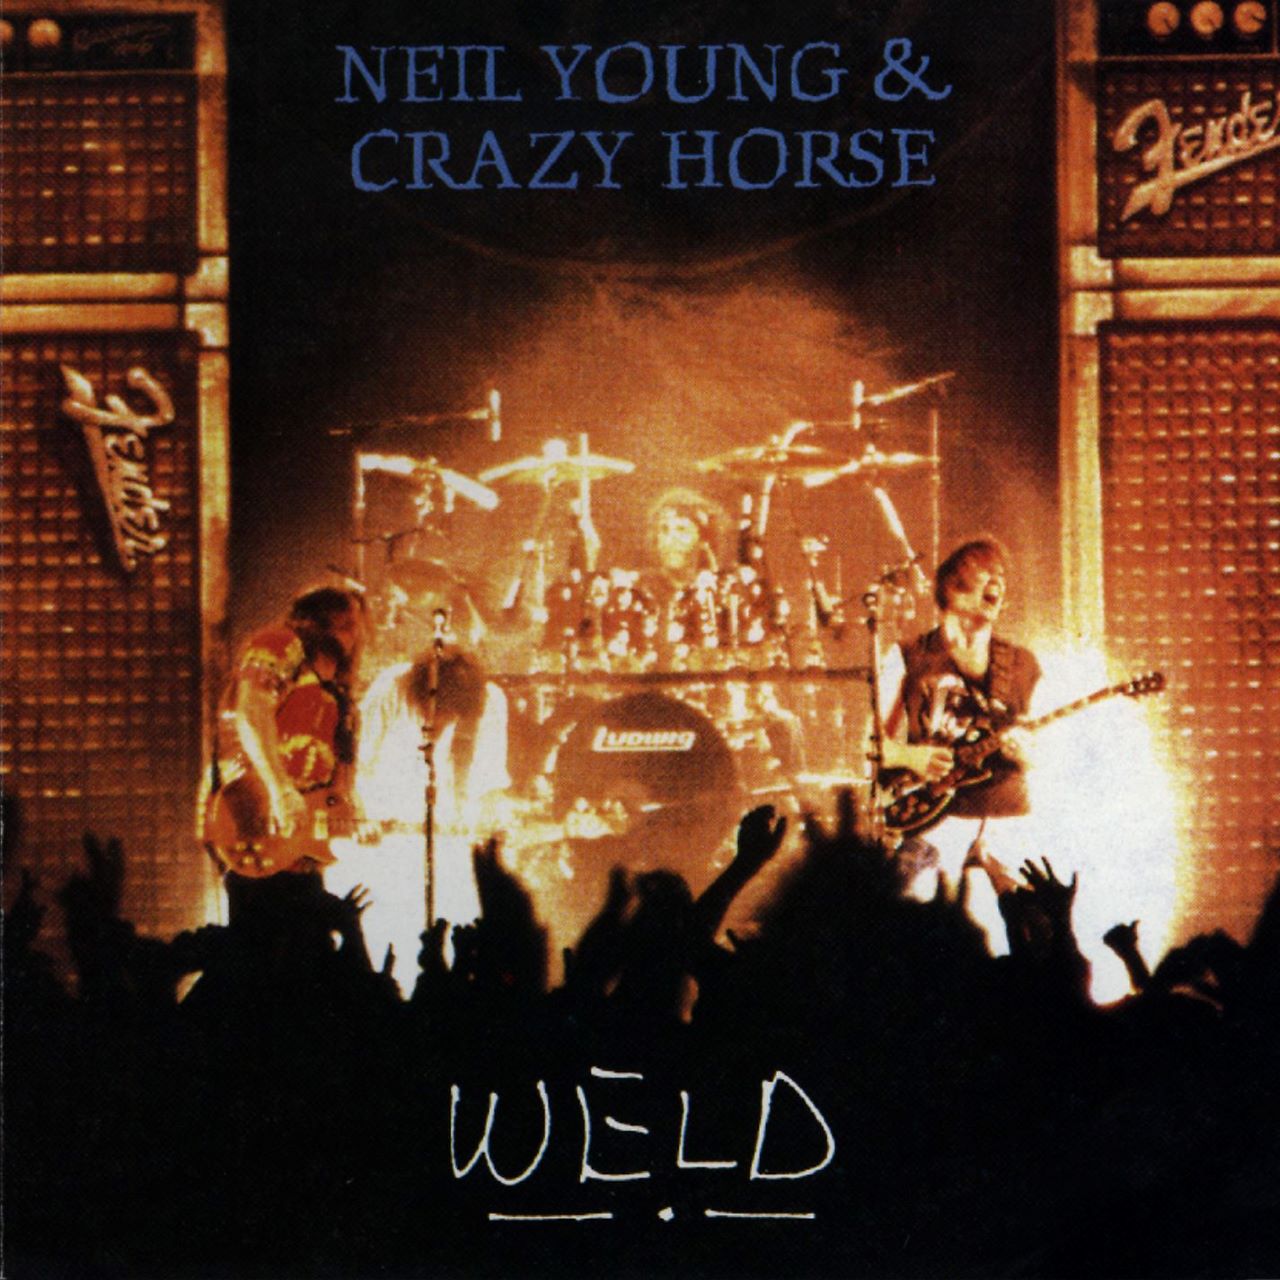 Neil Young & Crazy Horse – Weld cover album